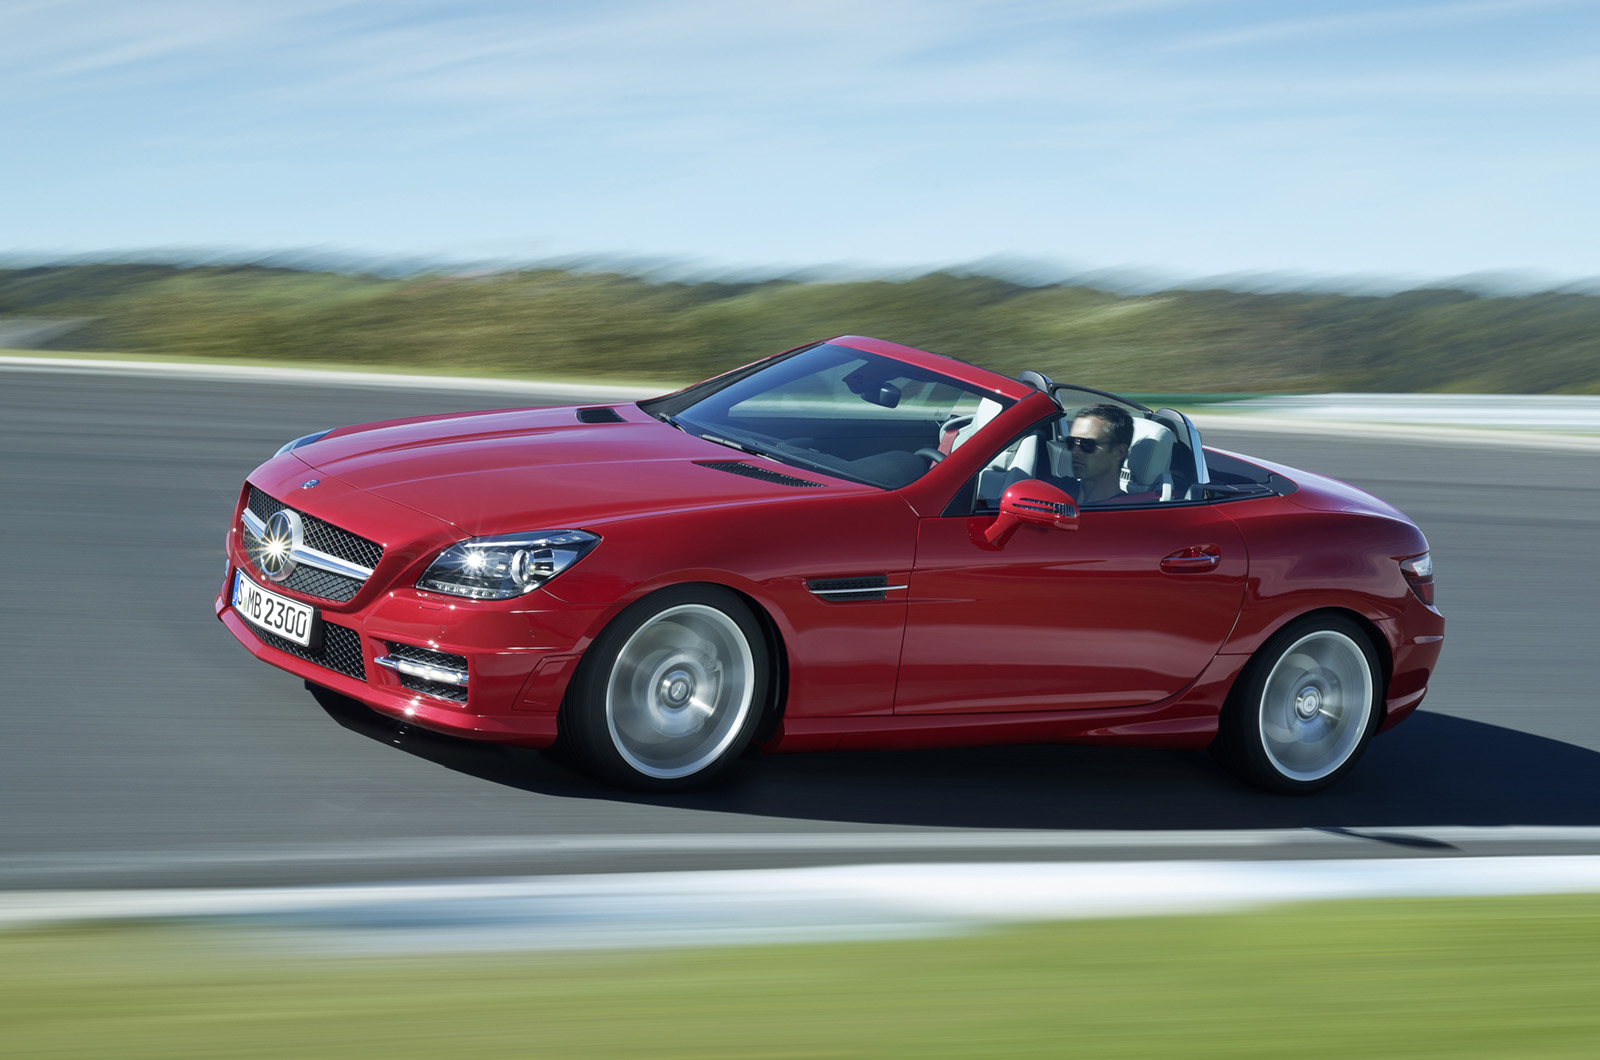 Top Gear - Mercedes-Benz SLK R171 review by James May 